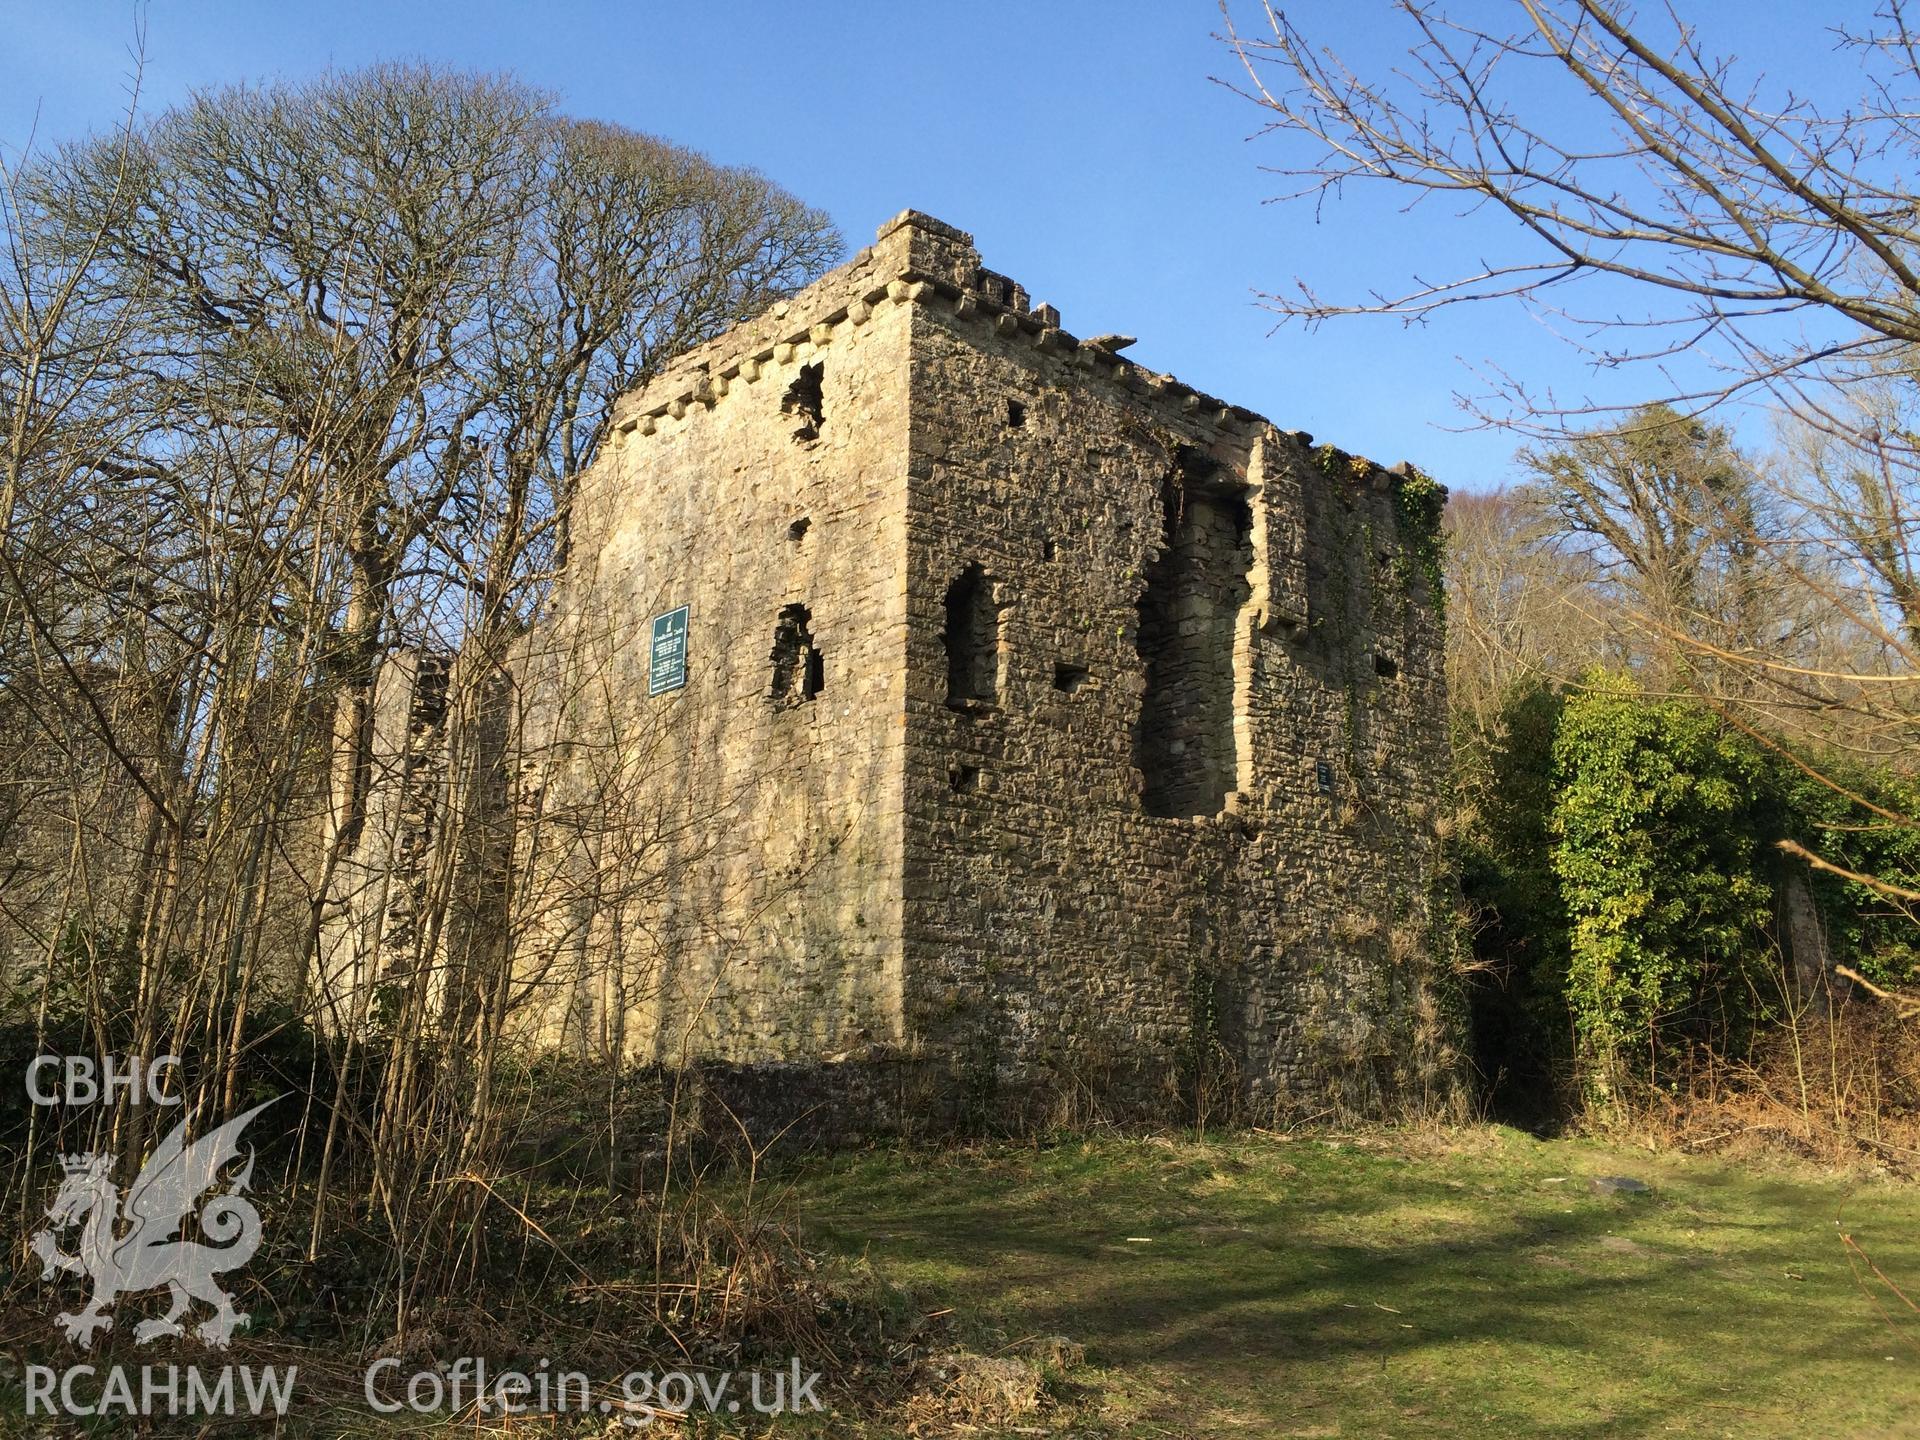 Colour photo showing Candleston Castle, produced by  Paul R. Davis,  13th March 2016.